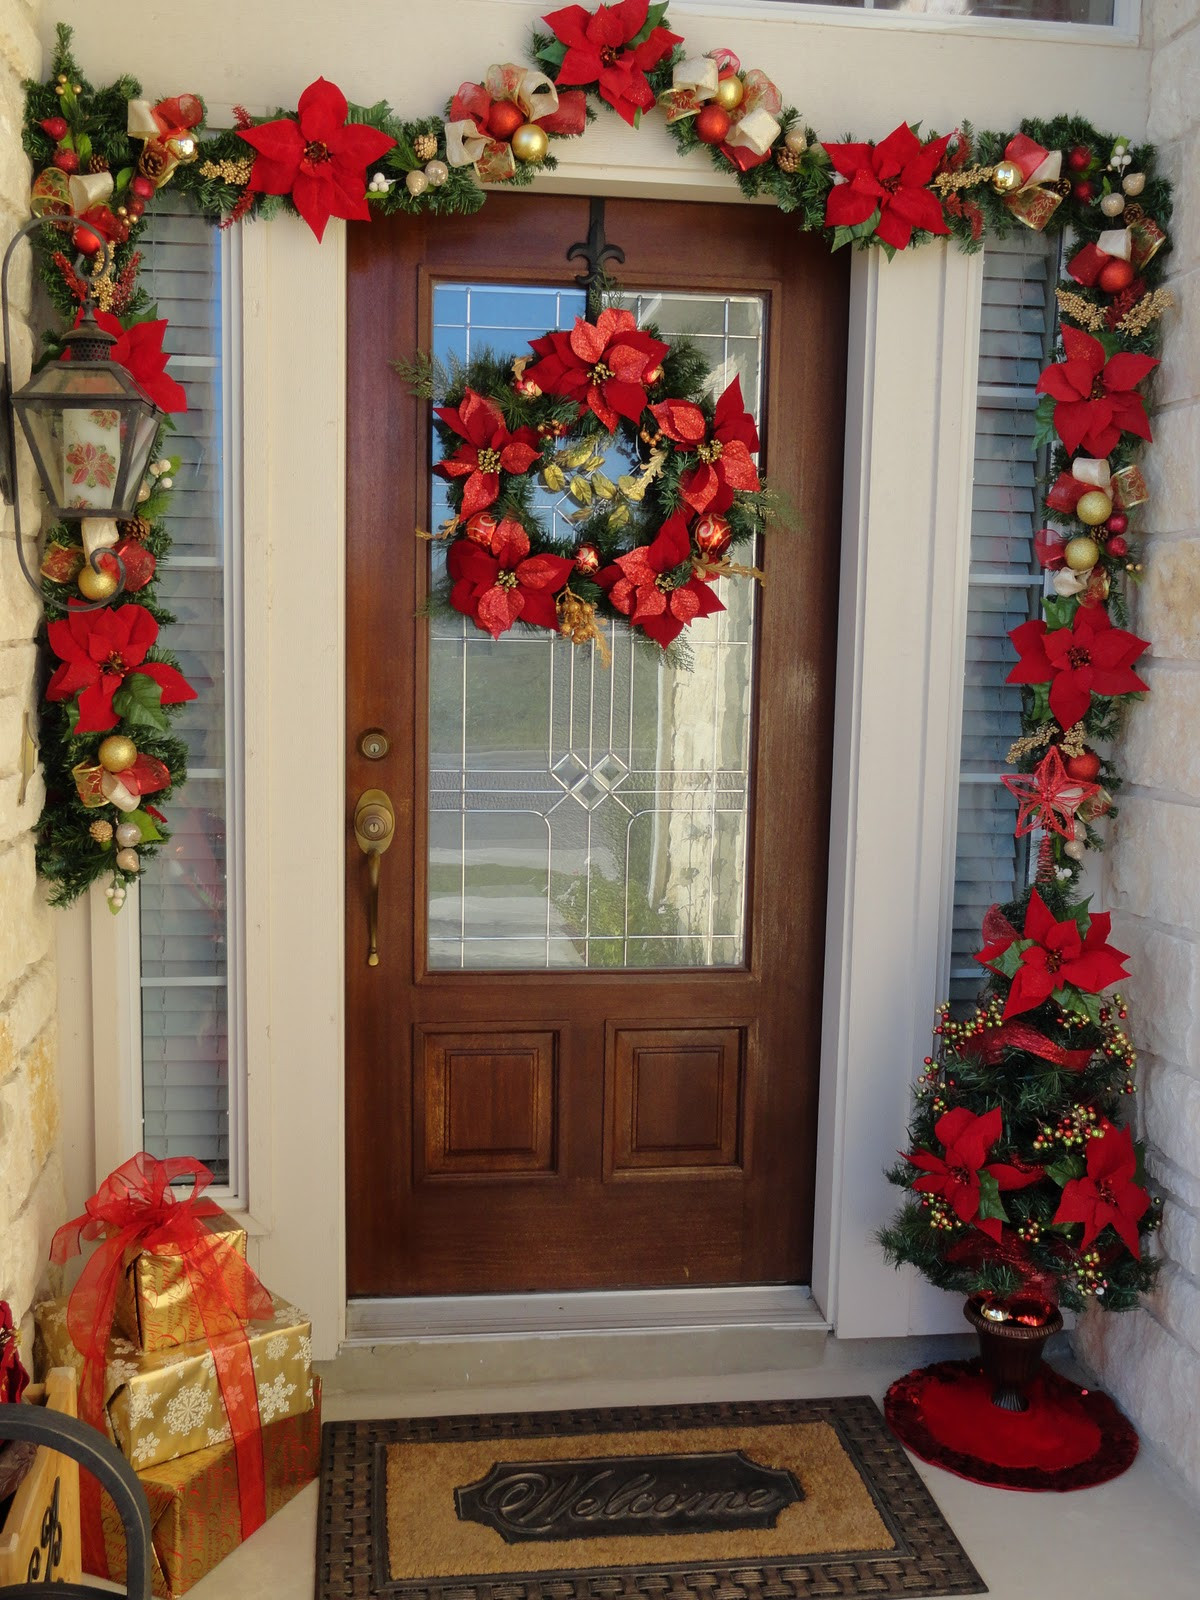 Door Christmas Decor
 Our Home Away From Home FRONT DOOR CHRISTMAS DECOR